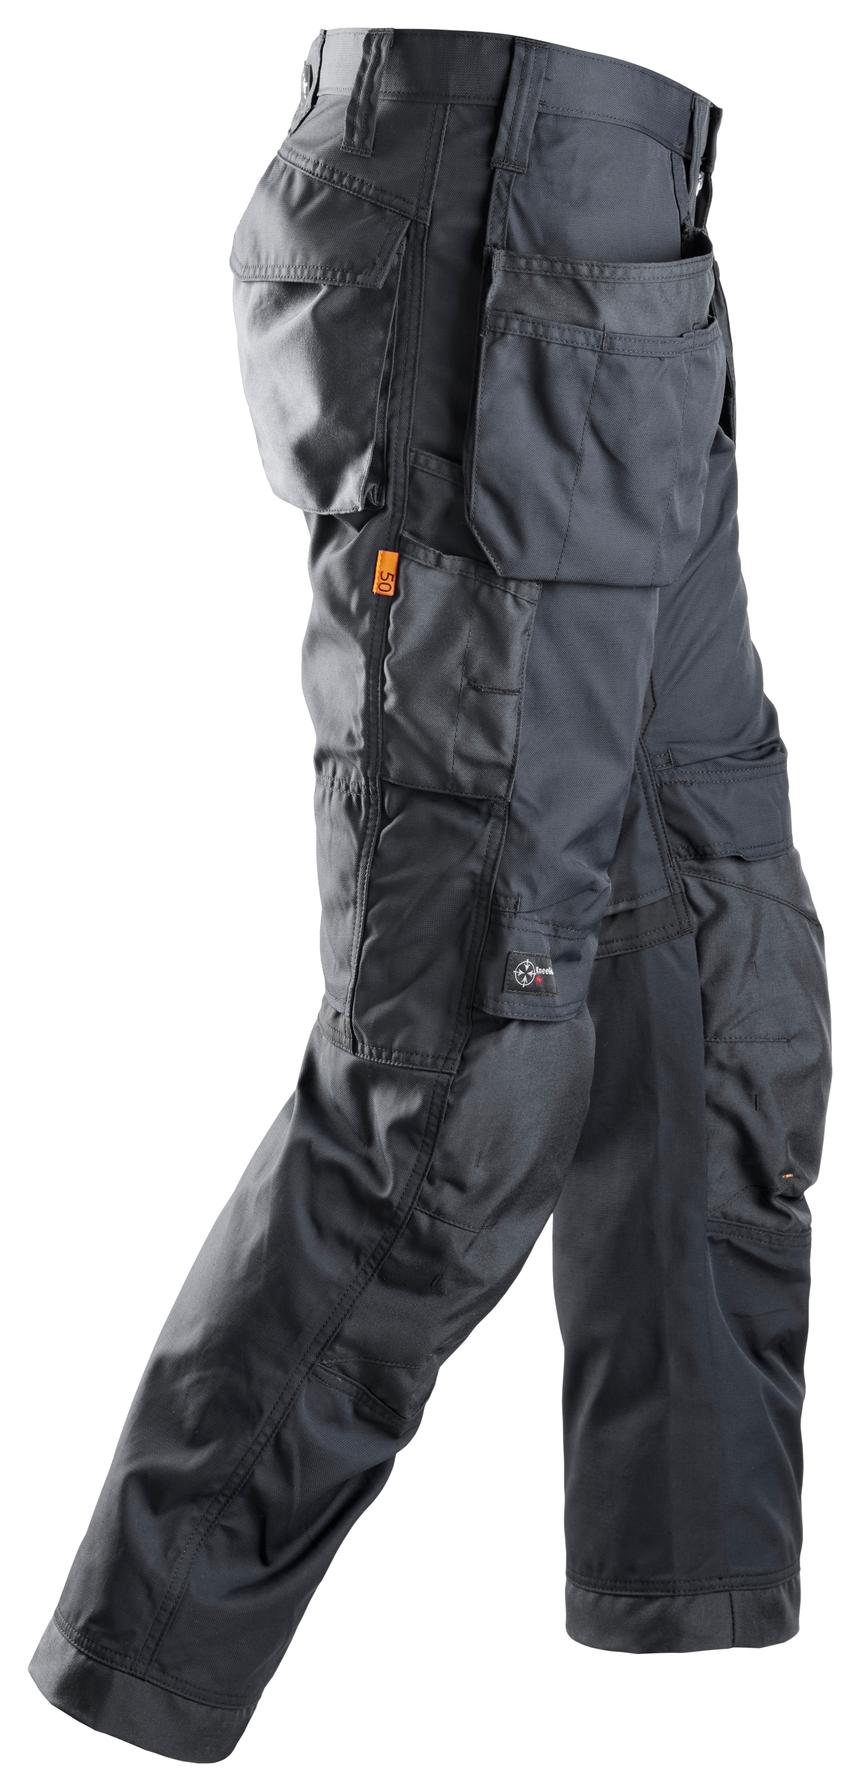 Snickers Workwear 6201 AllroundWork Pant + Holster Pockets - Steel Grey